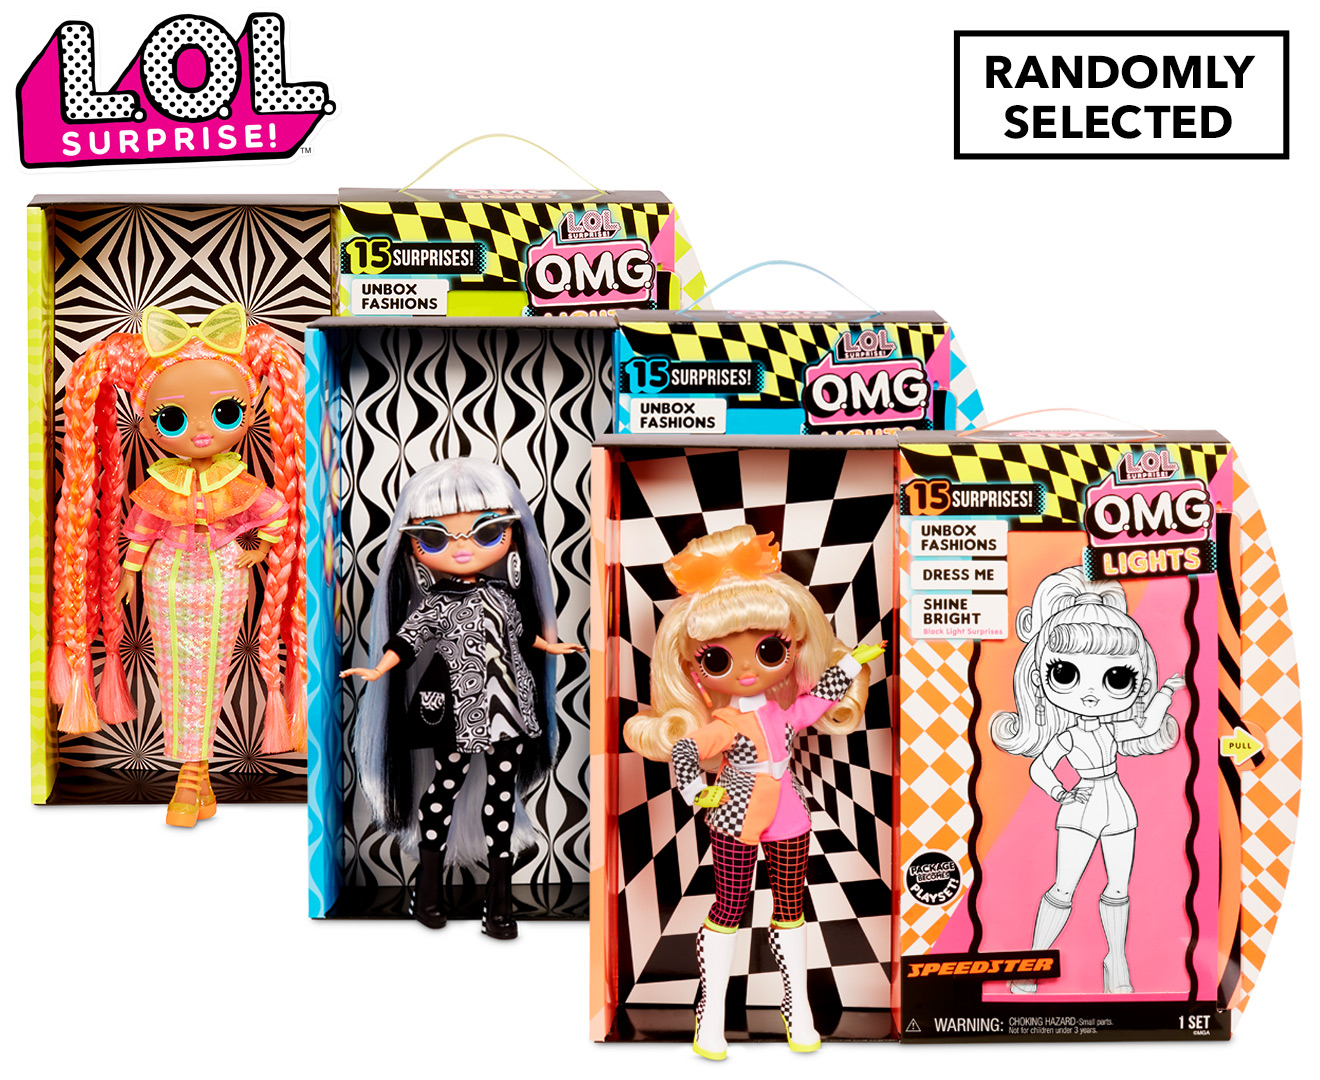 L.O.L. Surprise! O.M.G. Lights Groovy Babe Fashion Doll with 15 Surprises - wide 2